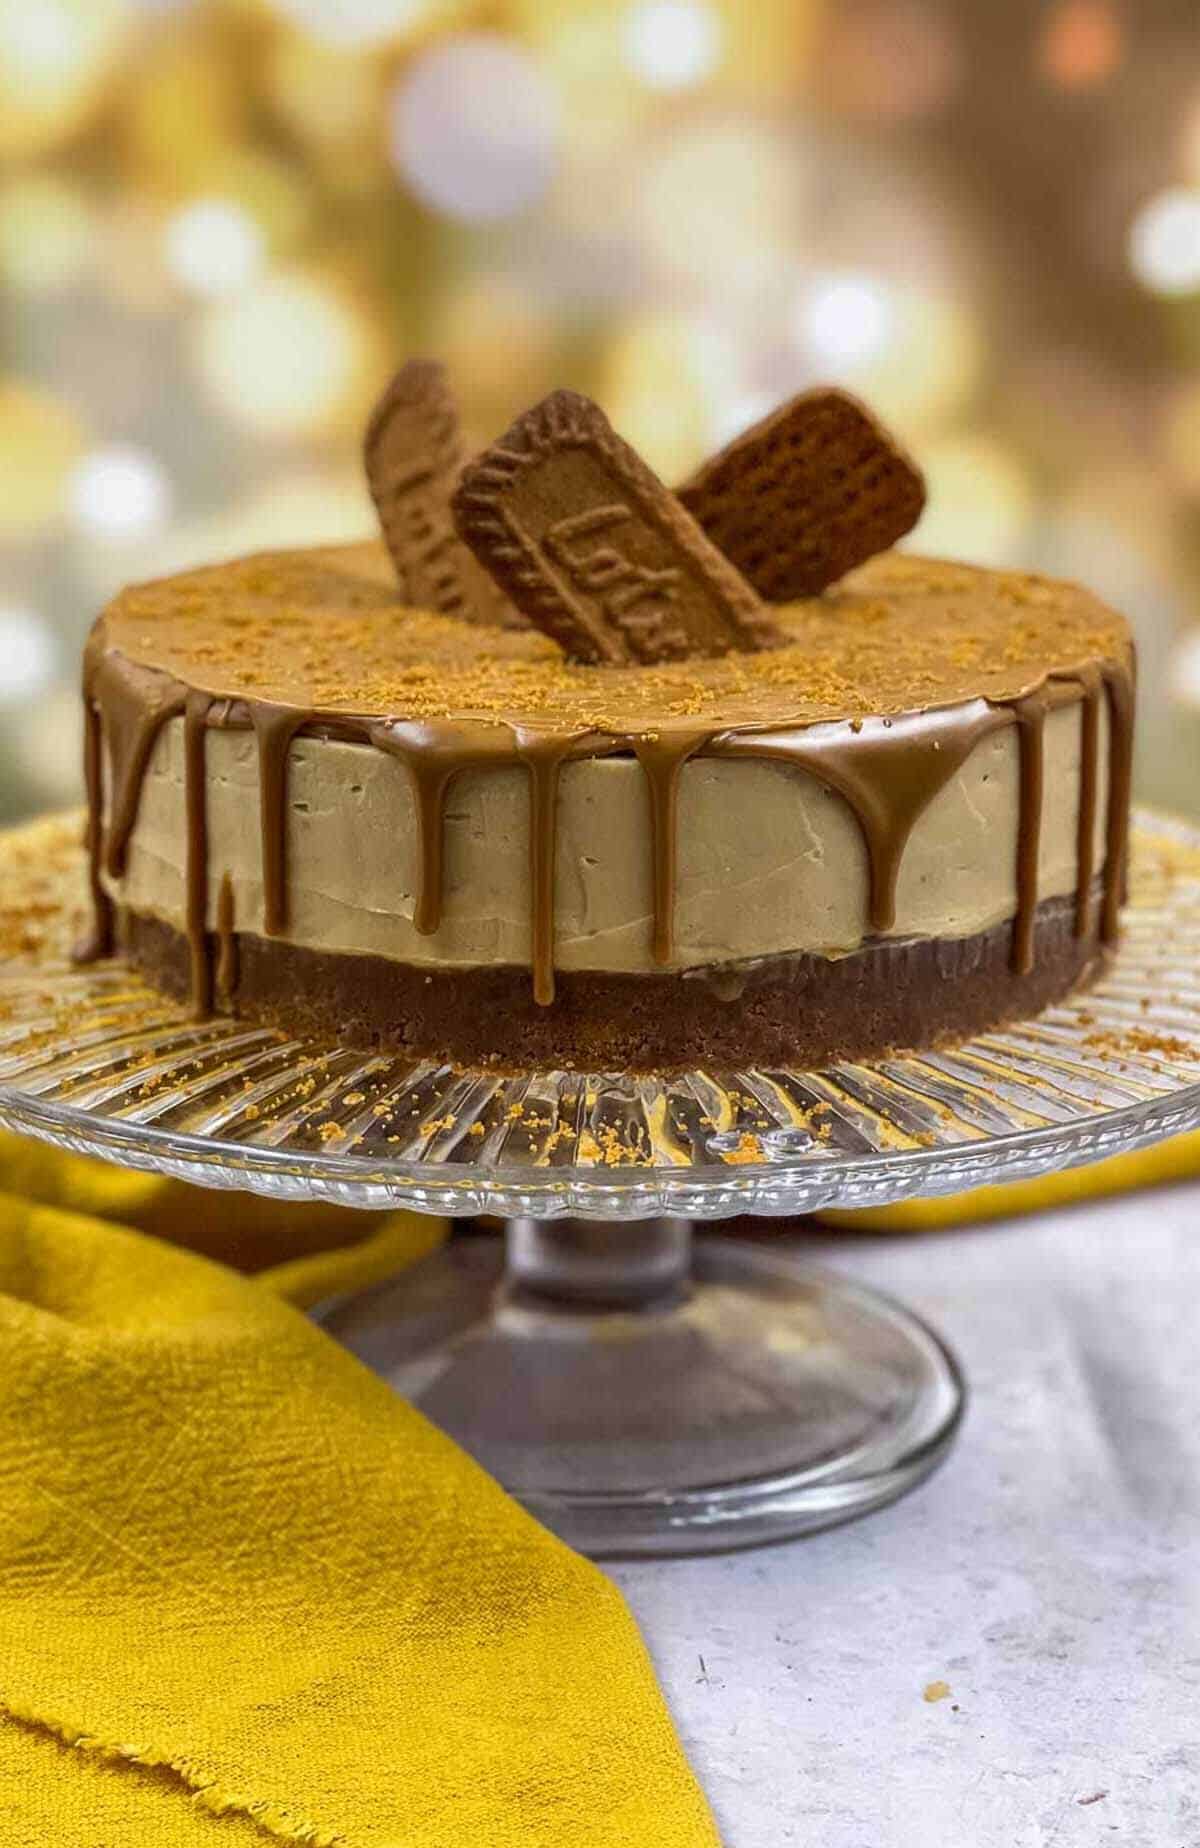 A delicious no-bake Biscoff cheesecake ready to eat.